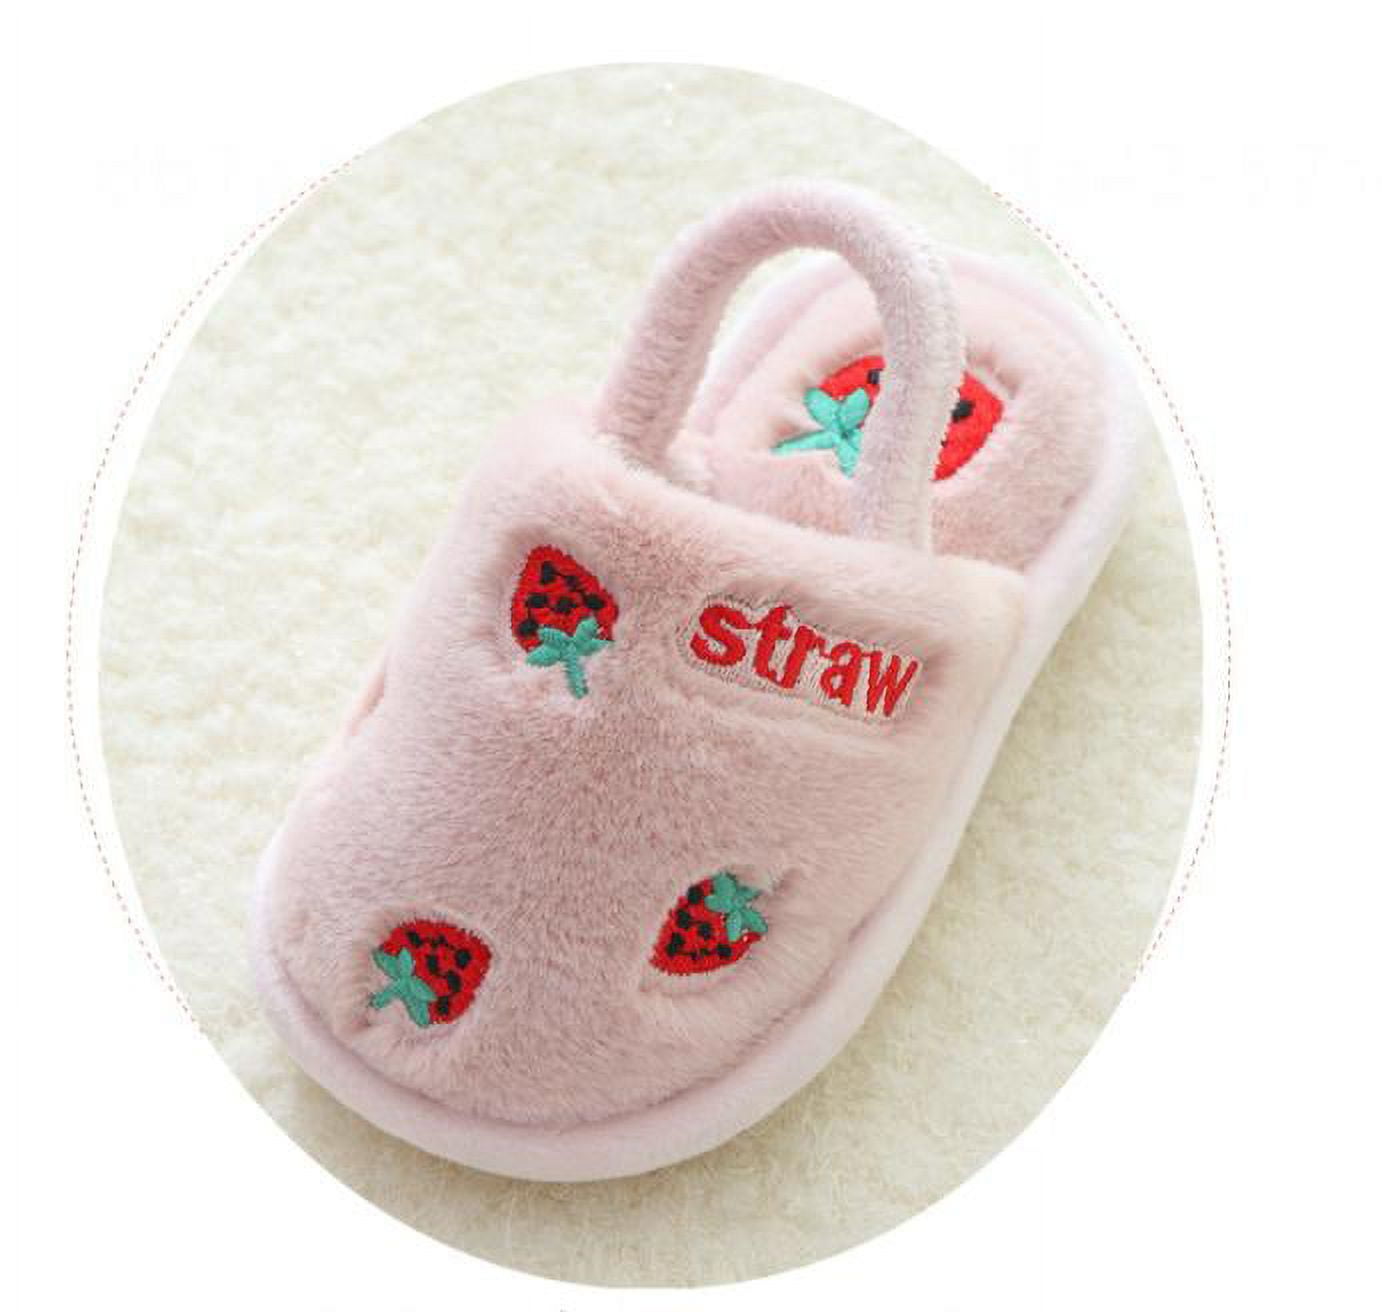  Kawaii Open Toe Slippers Women's Cute Strawberry Fluffy Cozy House  Shoes Sandals Fur Warm Comfy Slip On Slide Slippers (6,Pink)